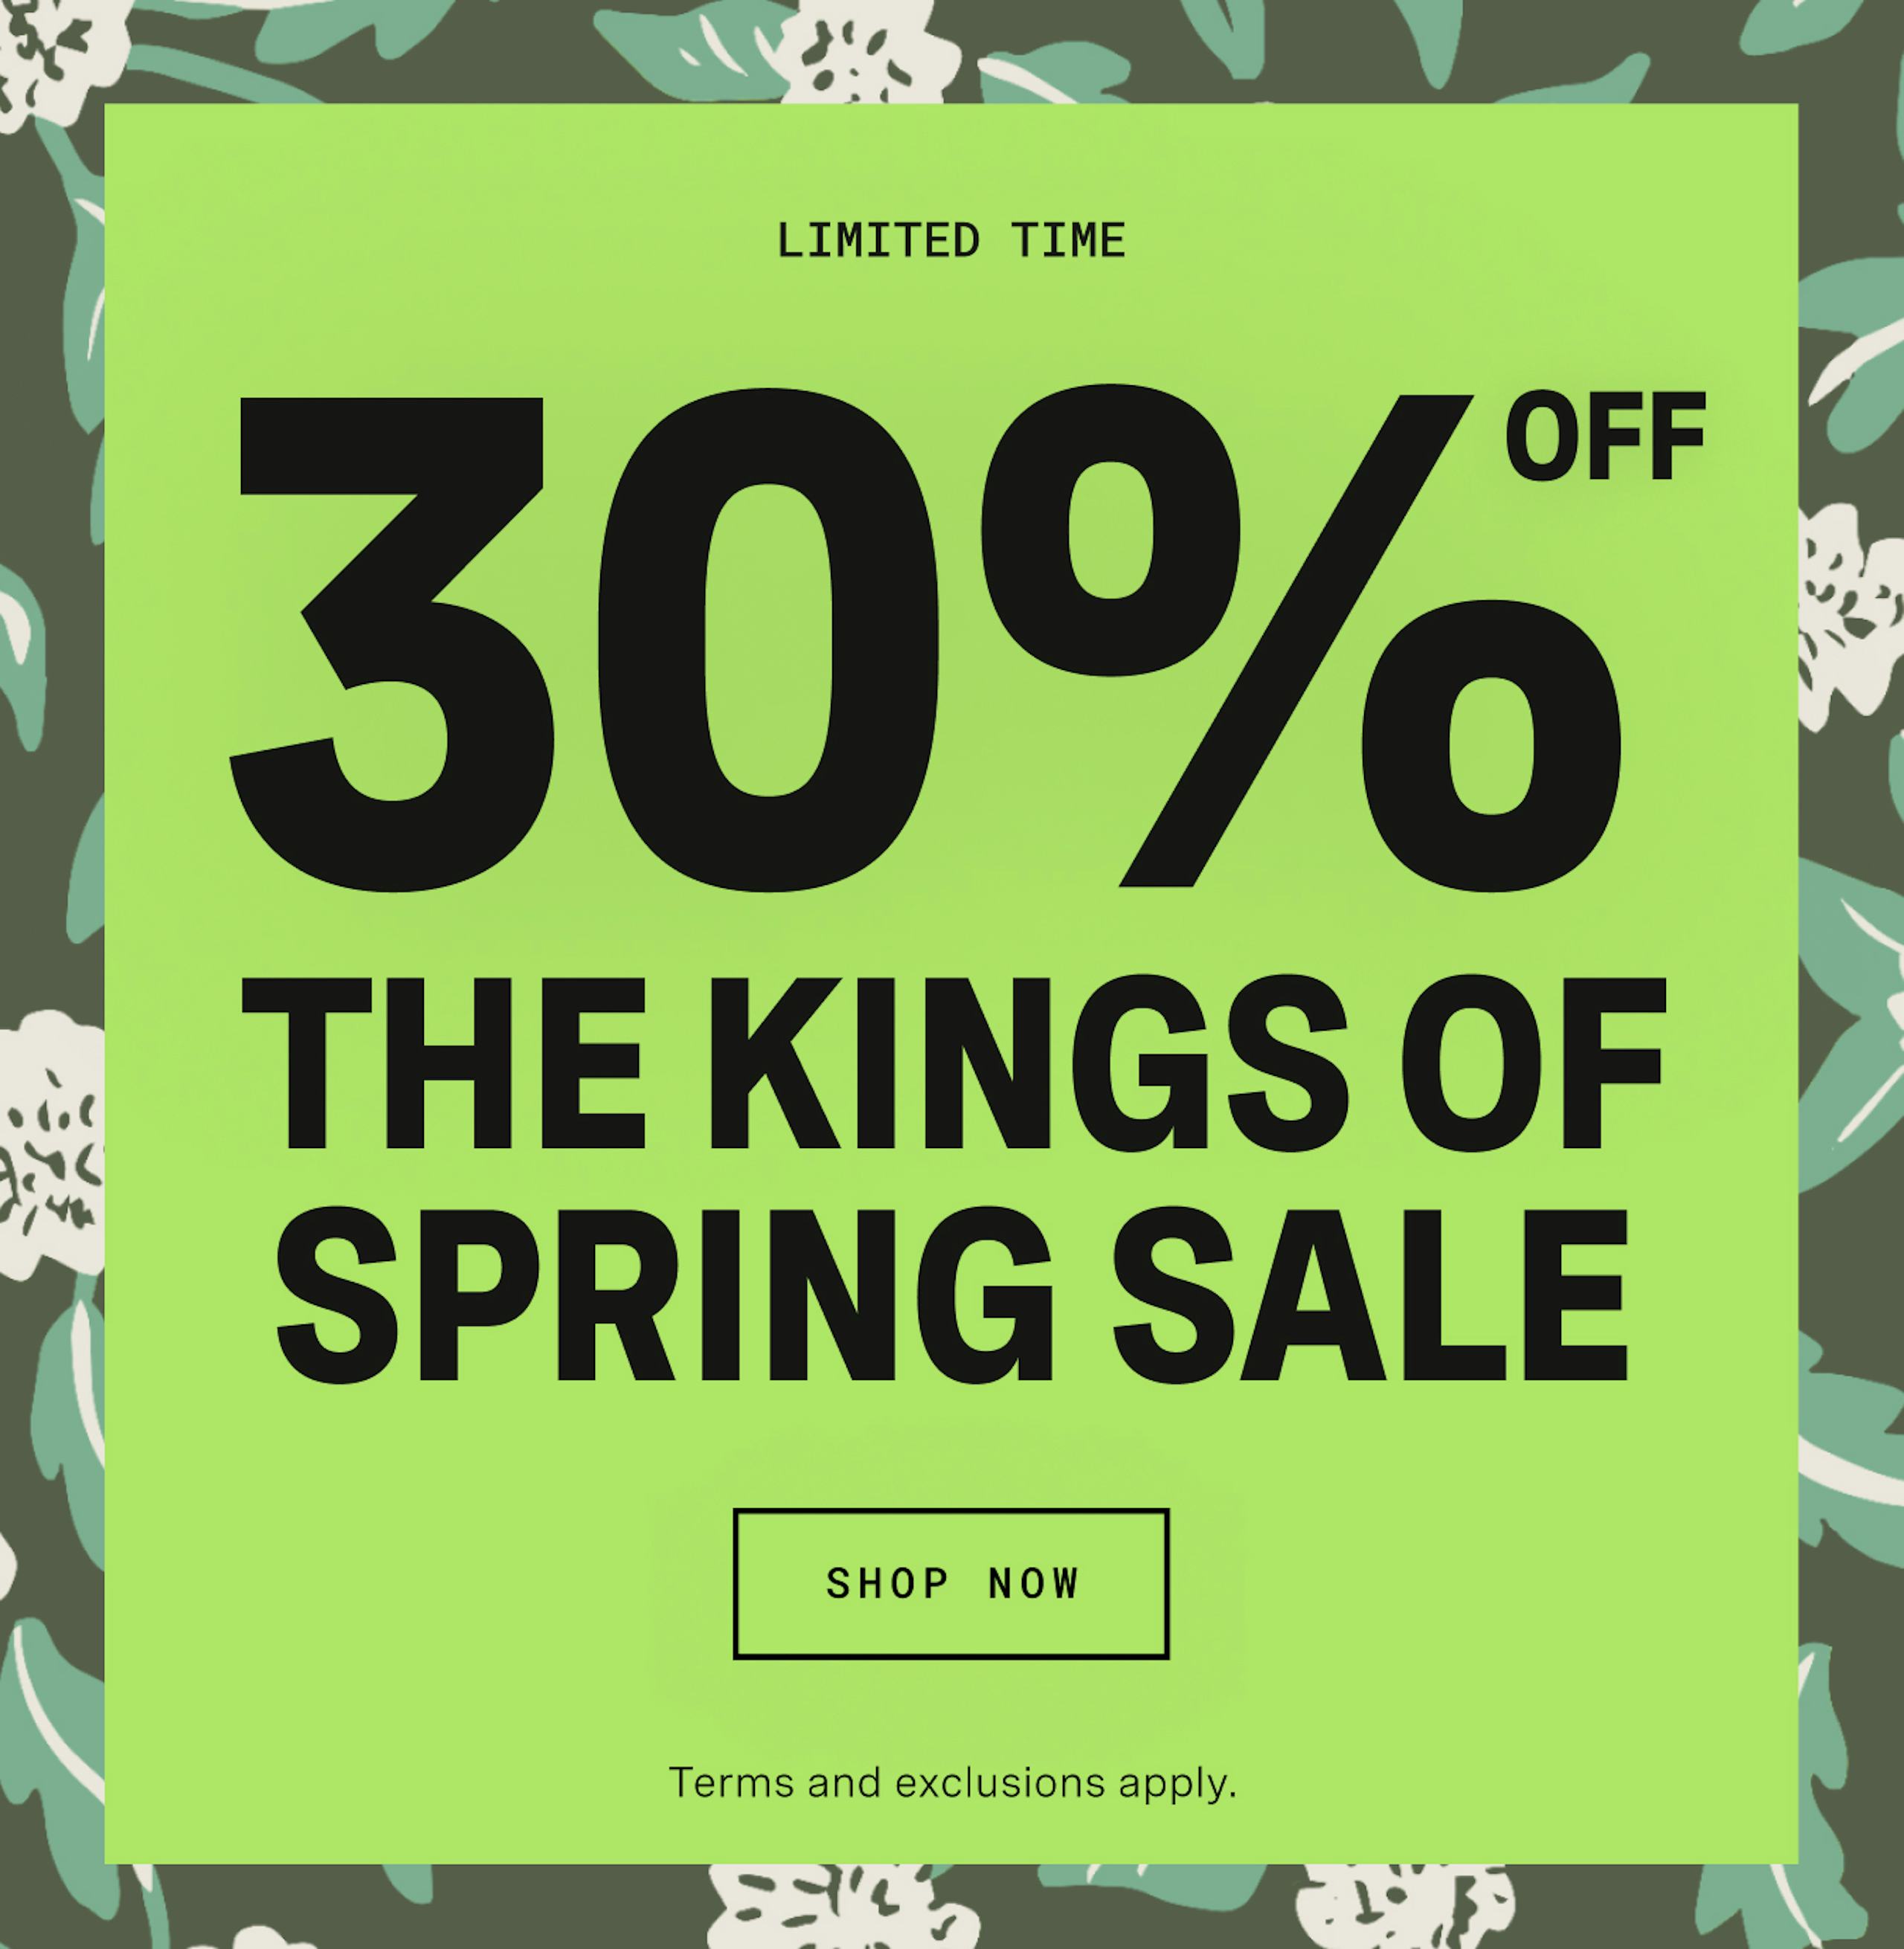 Limited Time | The Kings of Spring Sale | Shop Now | Terms and exclusions apply | See site for details